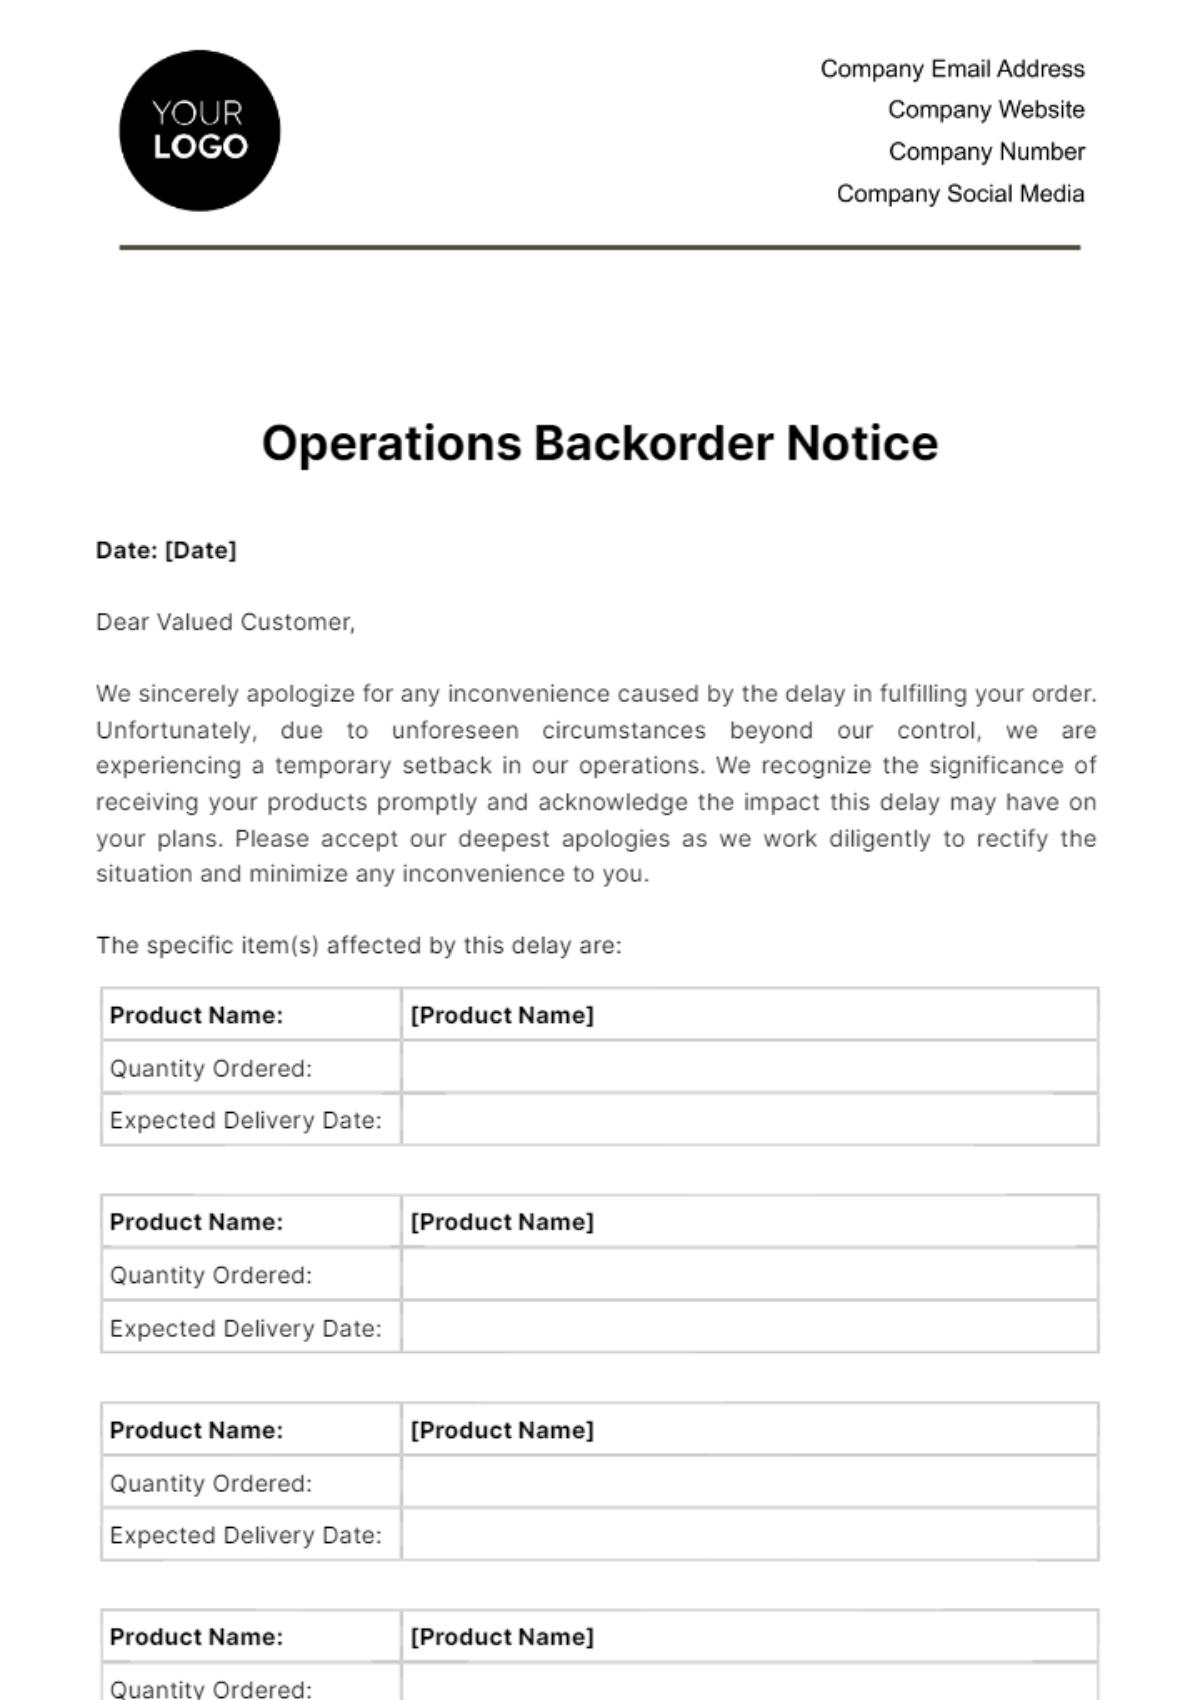 Operations Backorder Notice Template